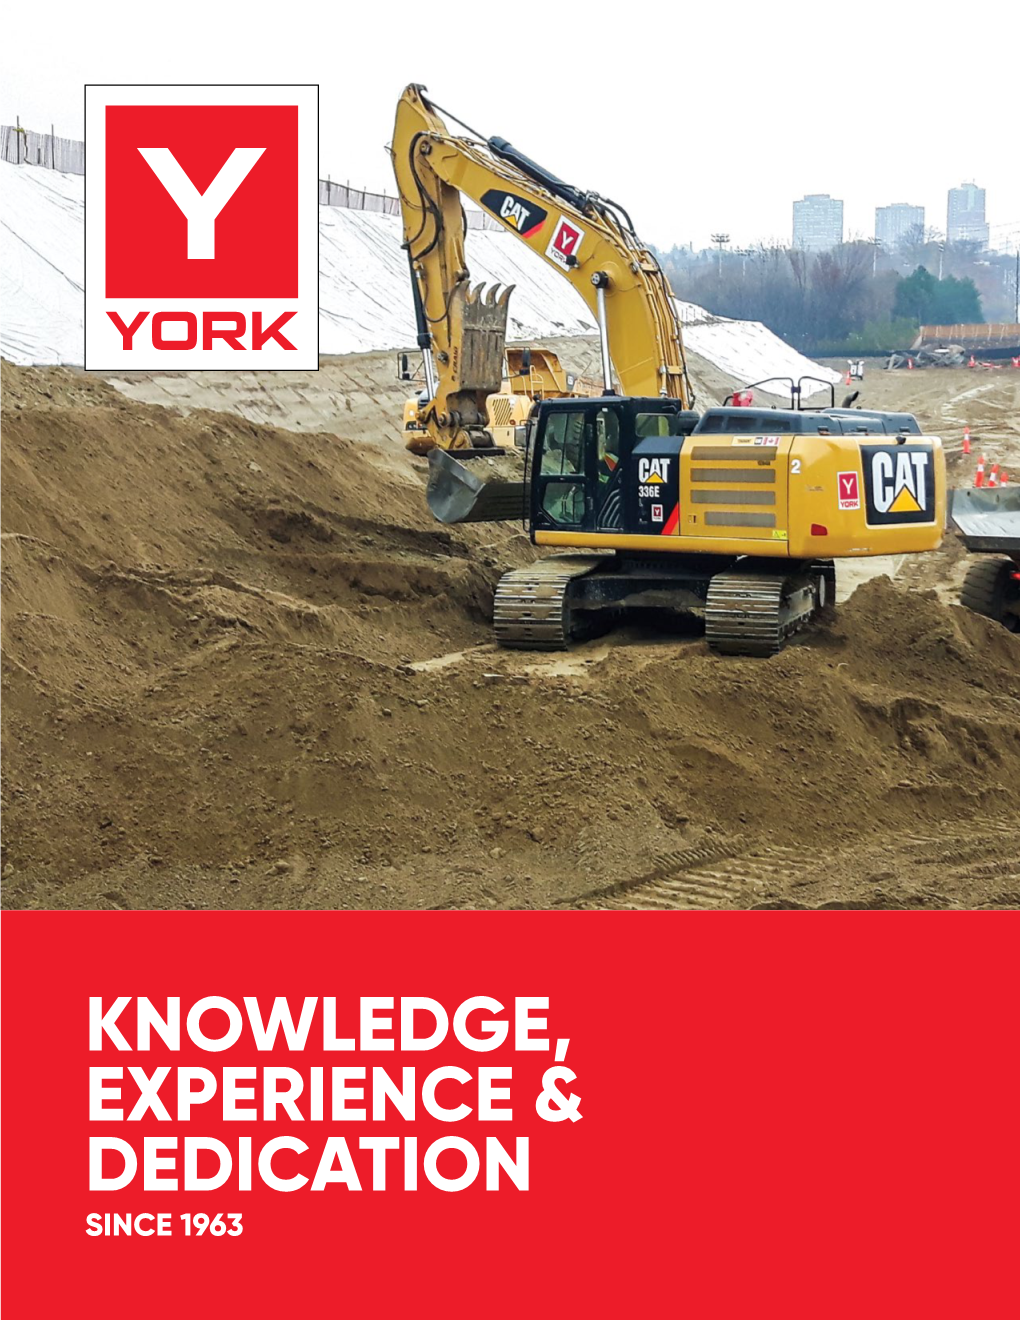 York Group of Companies Has STANDARDS & Prided Itself As a Recognized Leader in the Industry